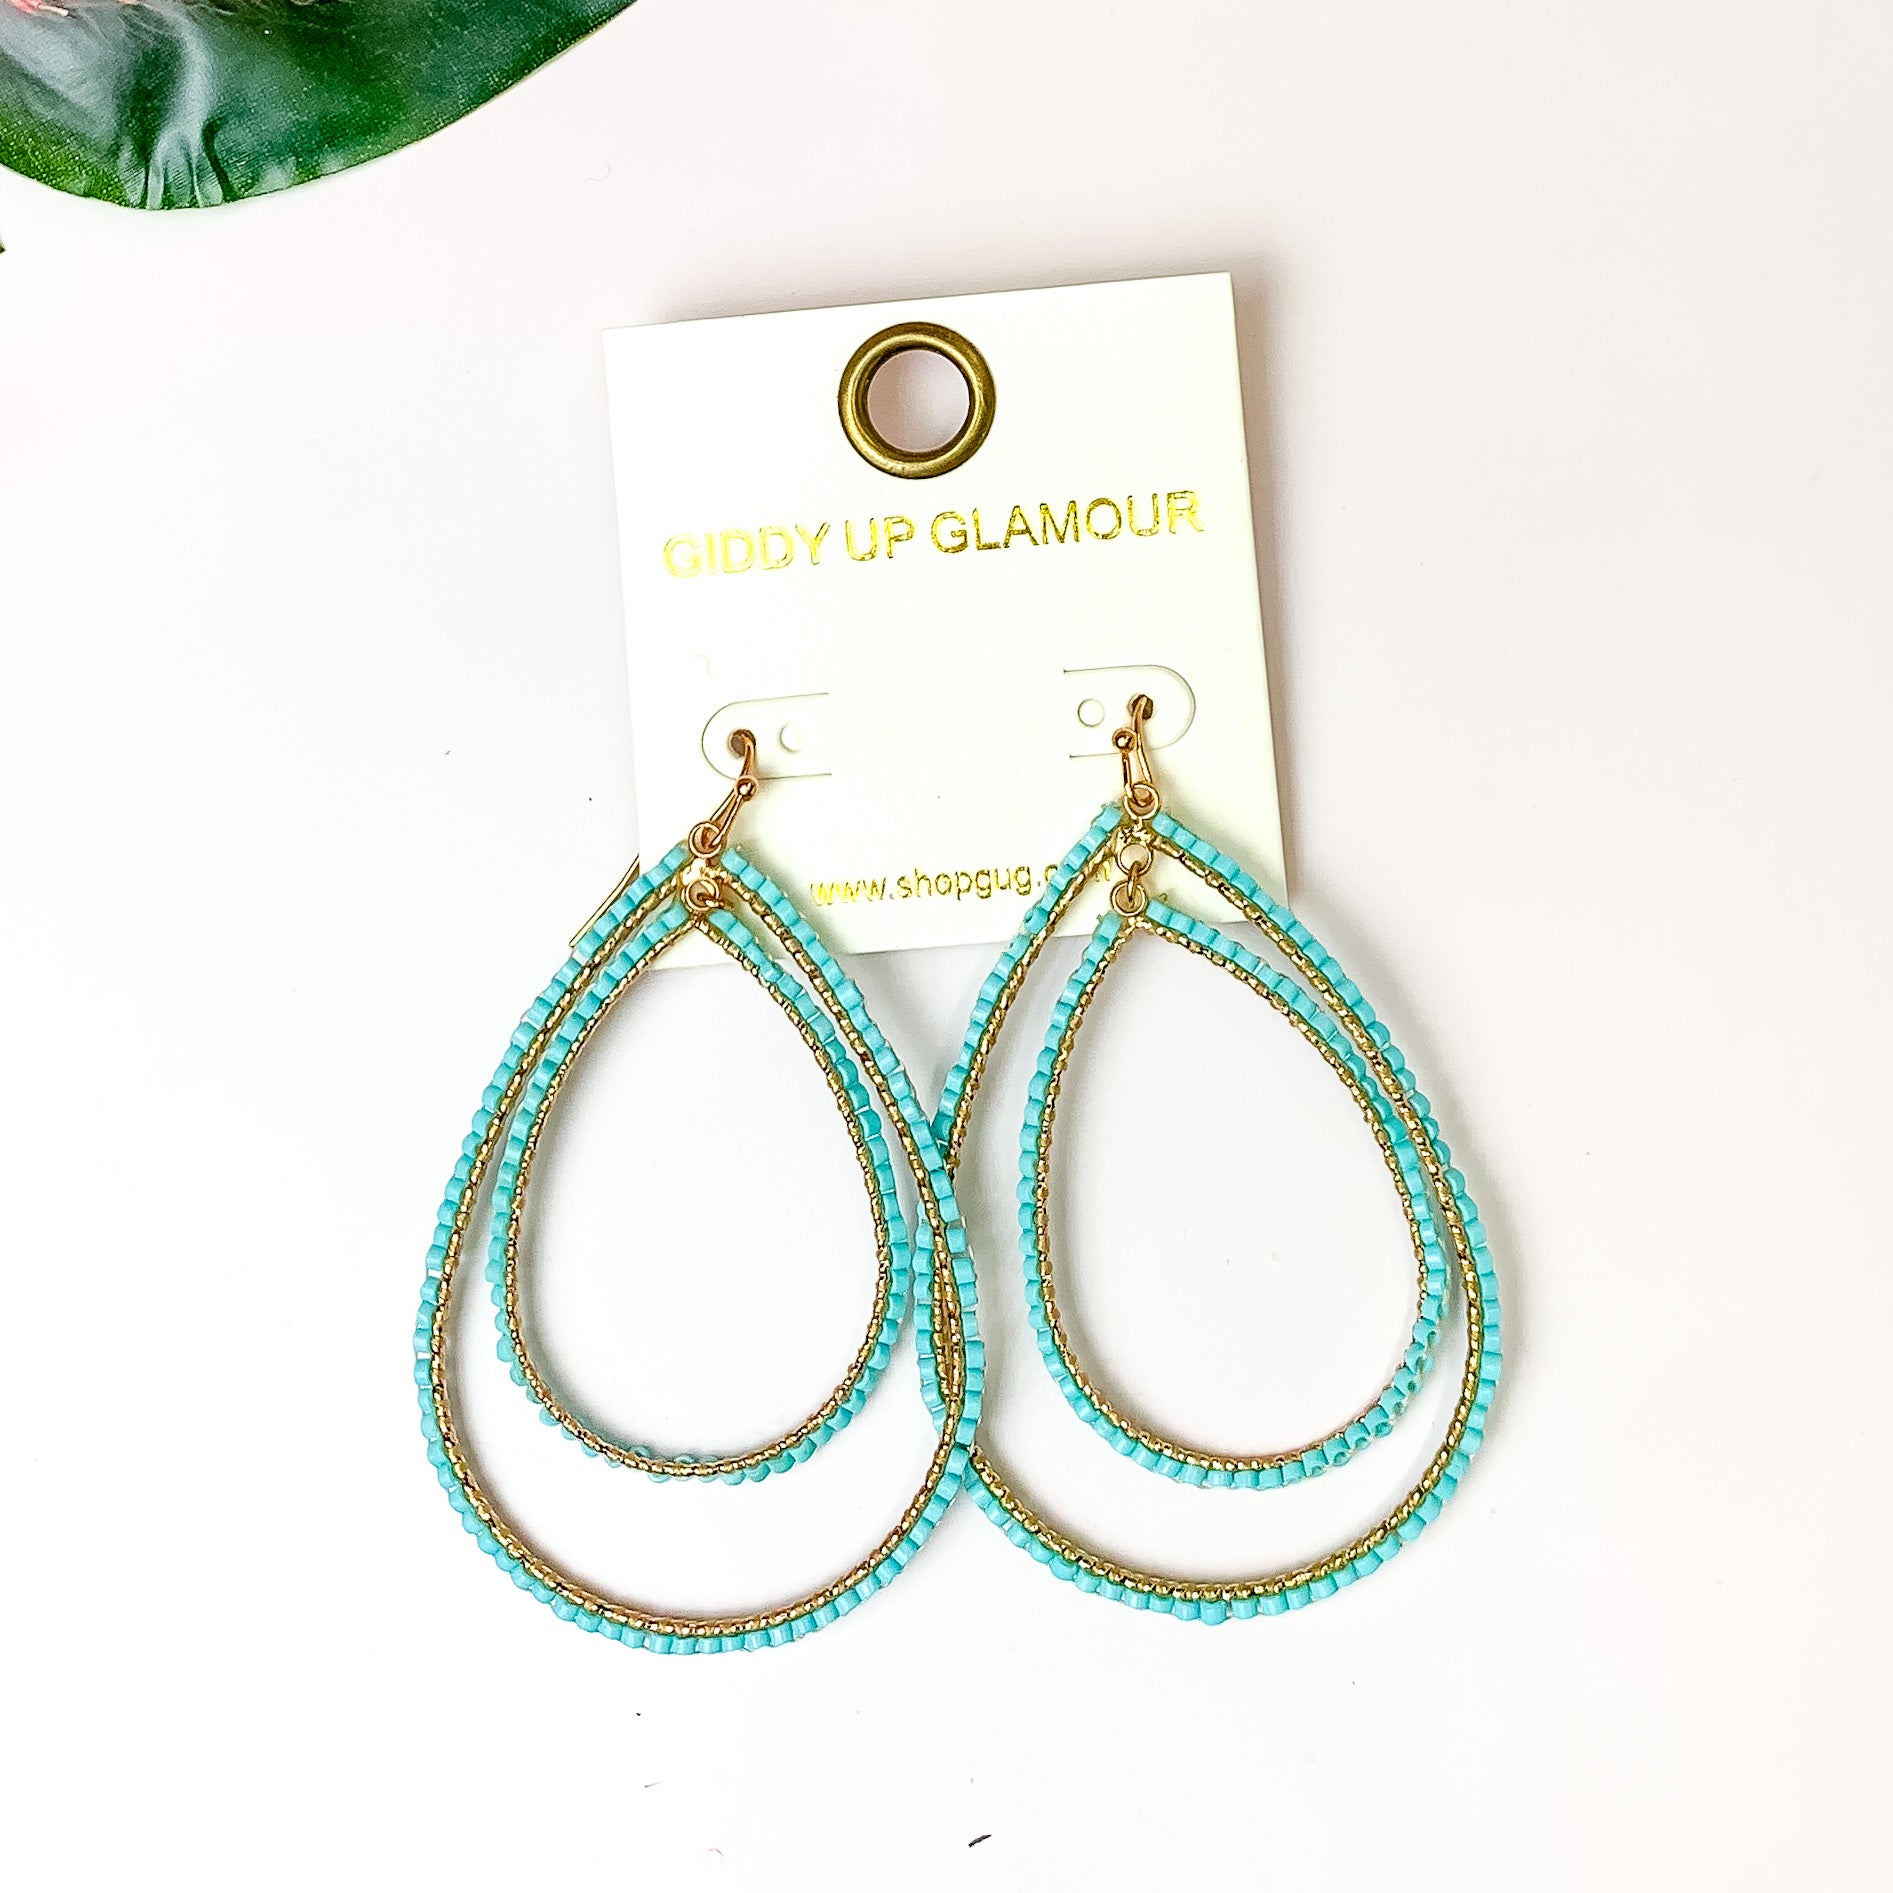 Double Open Teardrop Gold Tone Earrings with Beaded Outline in Turquoise. Pictured on a white background with plants in the top left corner.